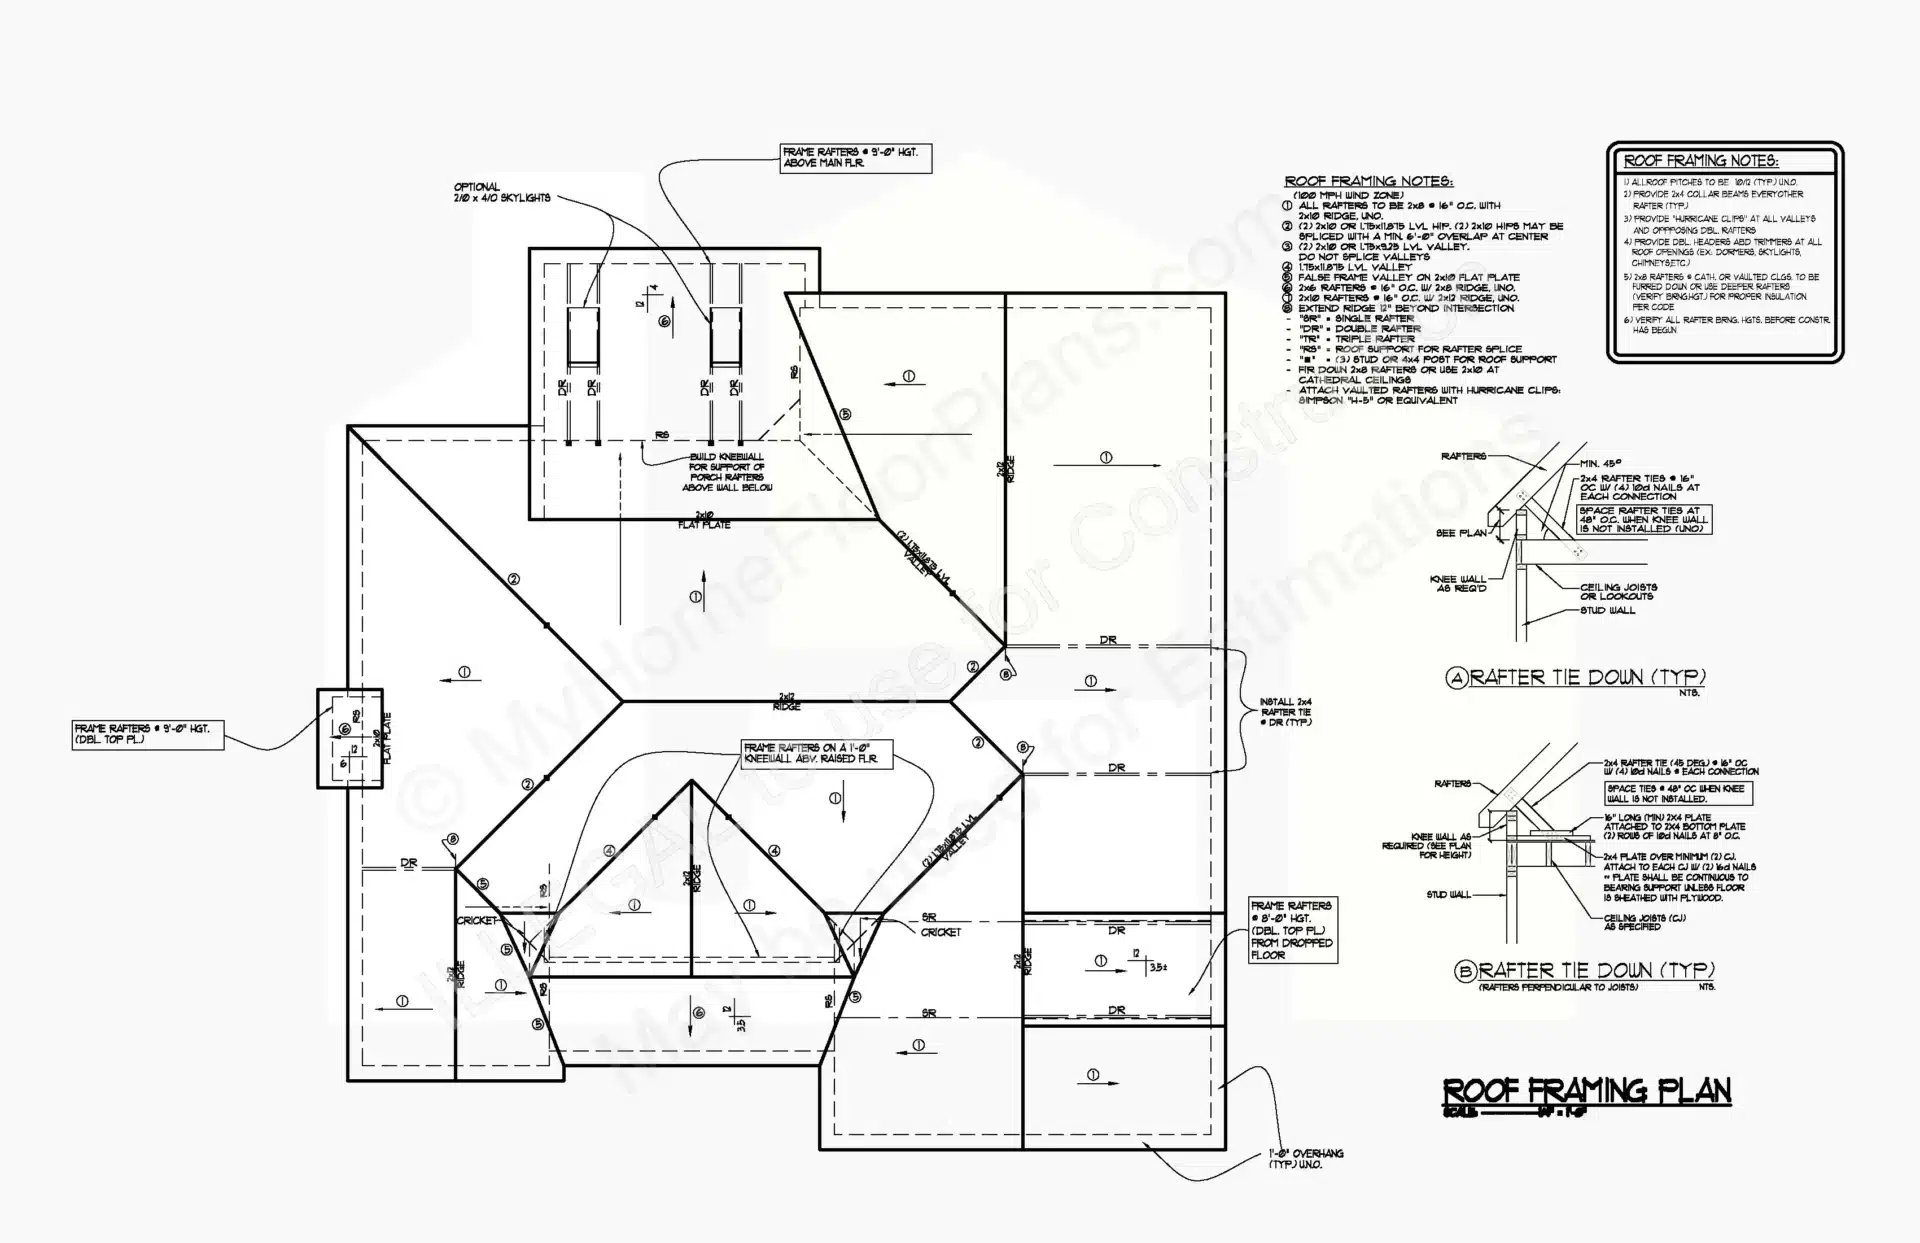 12-2289 my home floor plans_Page_10